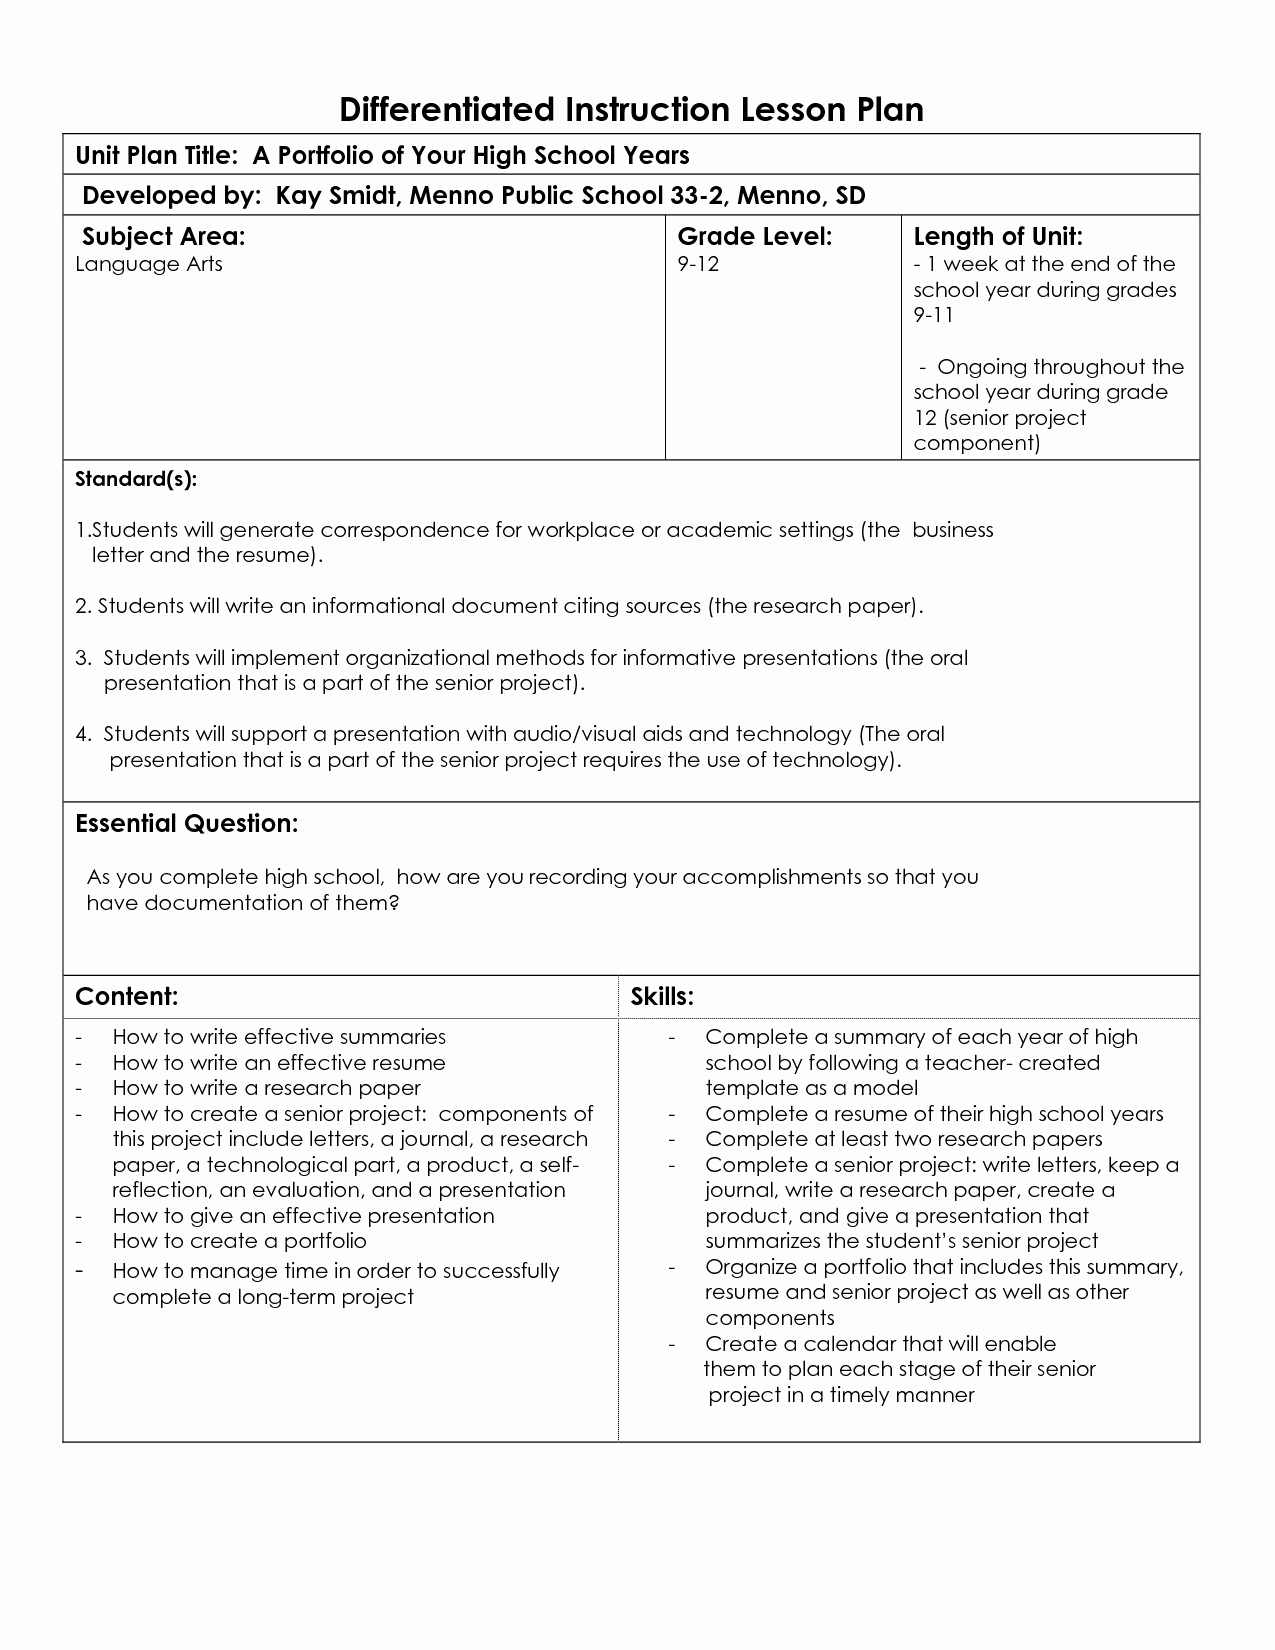 Differentiated Lesson Plan Template New Differentiated Instruction Lesson Plan Template 1954